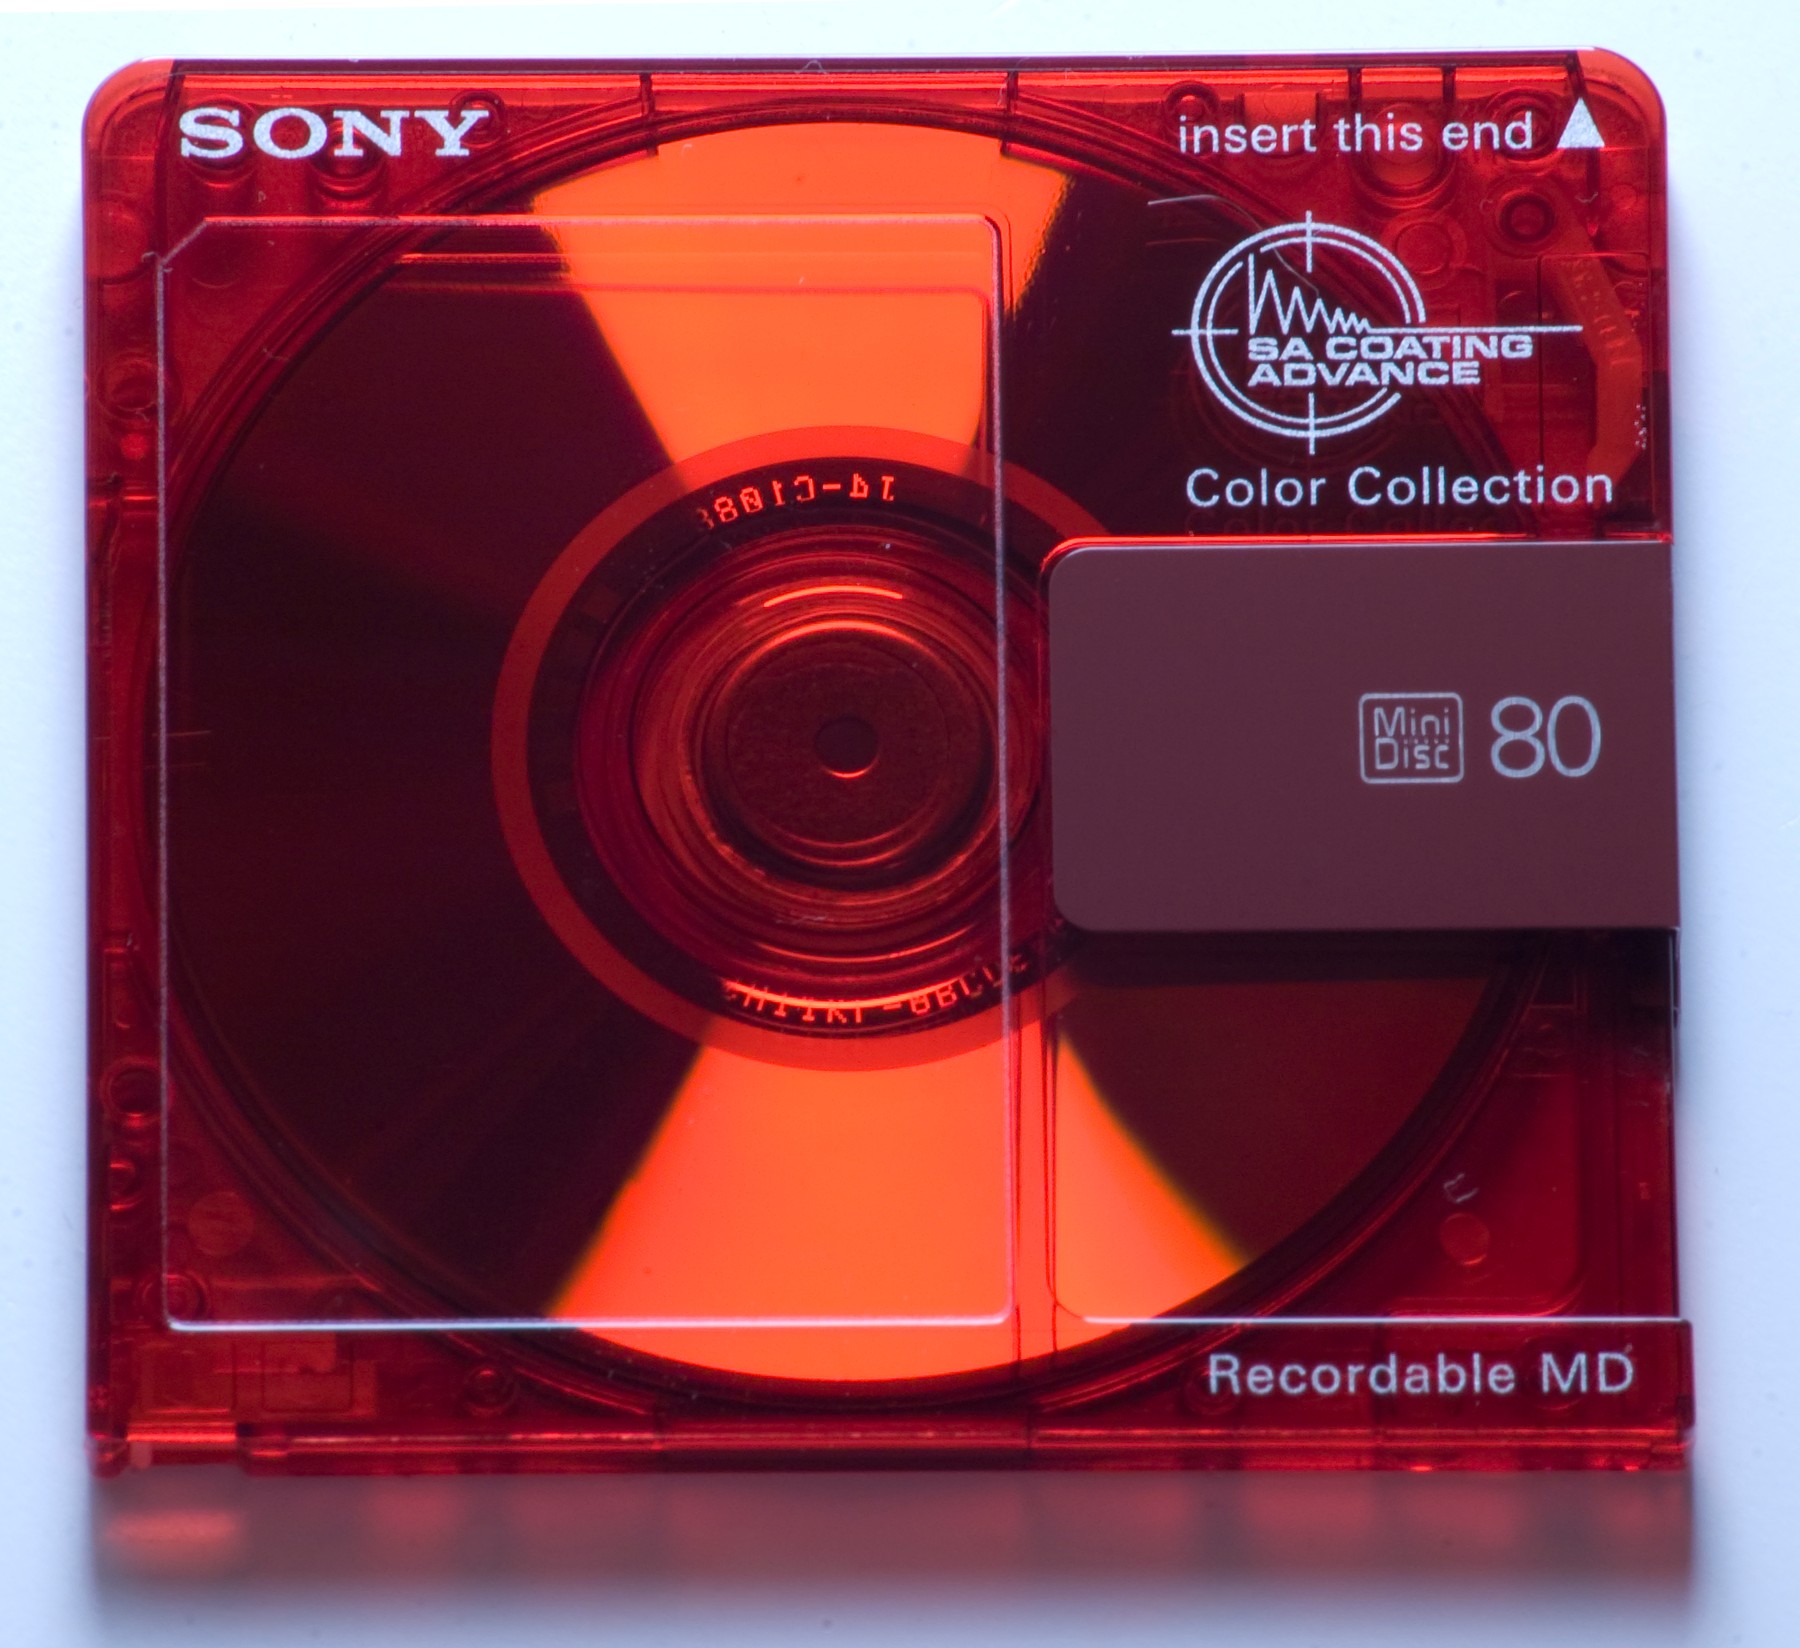 Sony Recordable MD (Color Collection, Red)